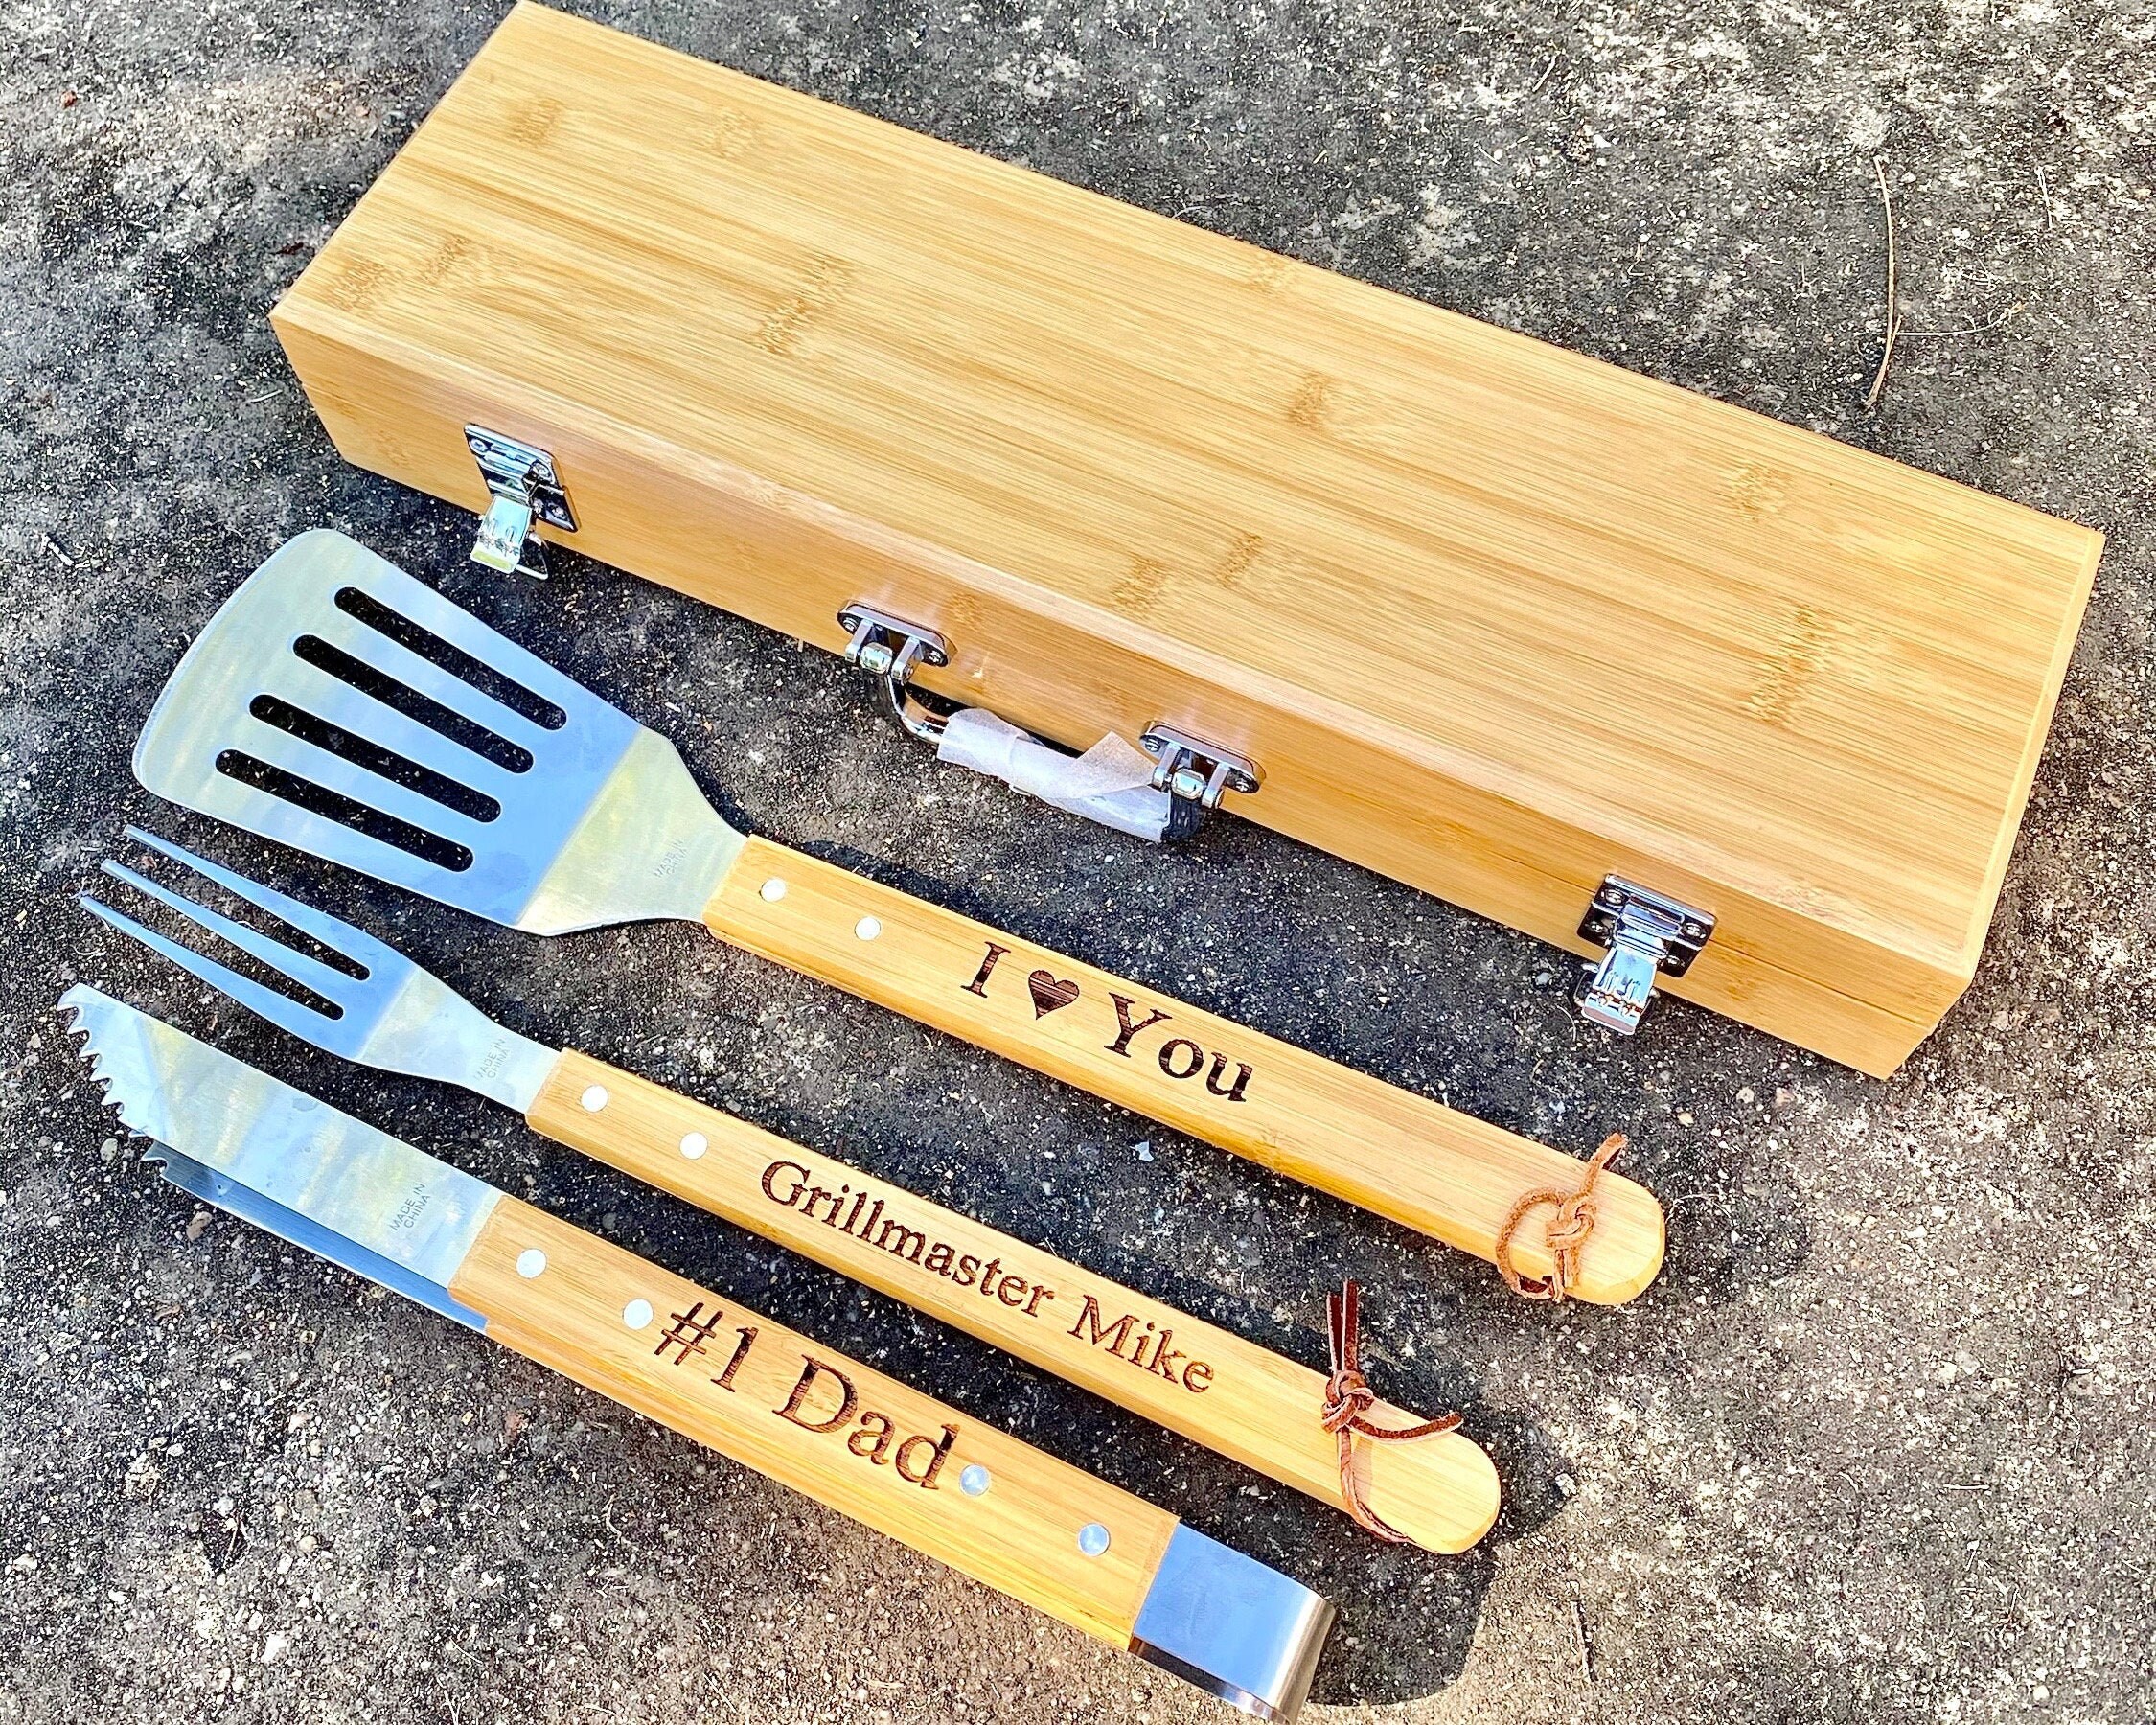 6 Tool Player Grill Tool Set - Groovy Groomsmen Gifts